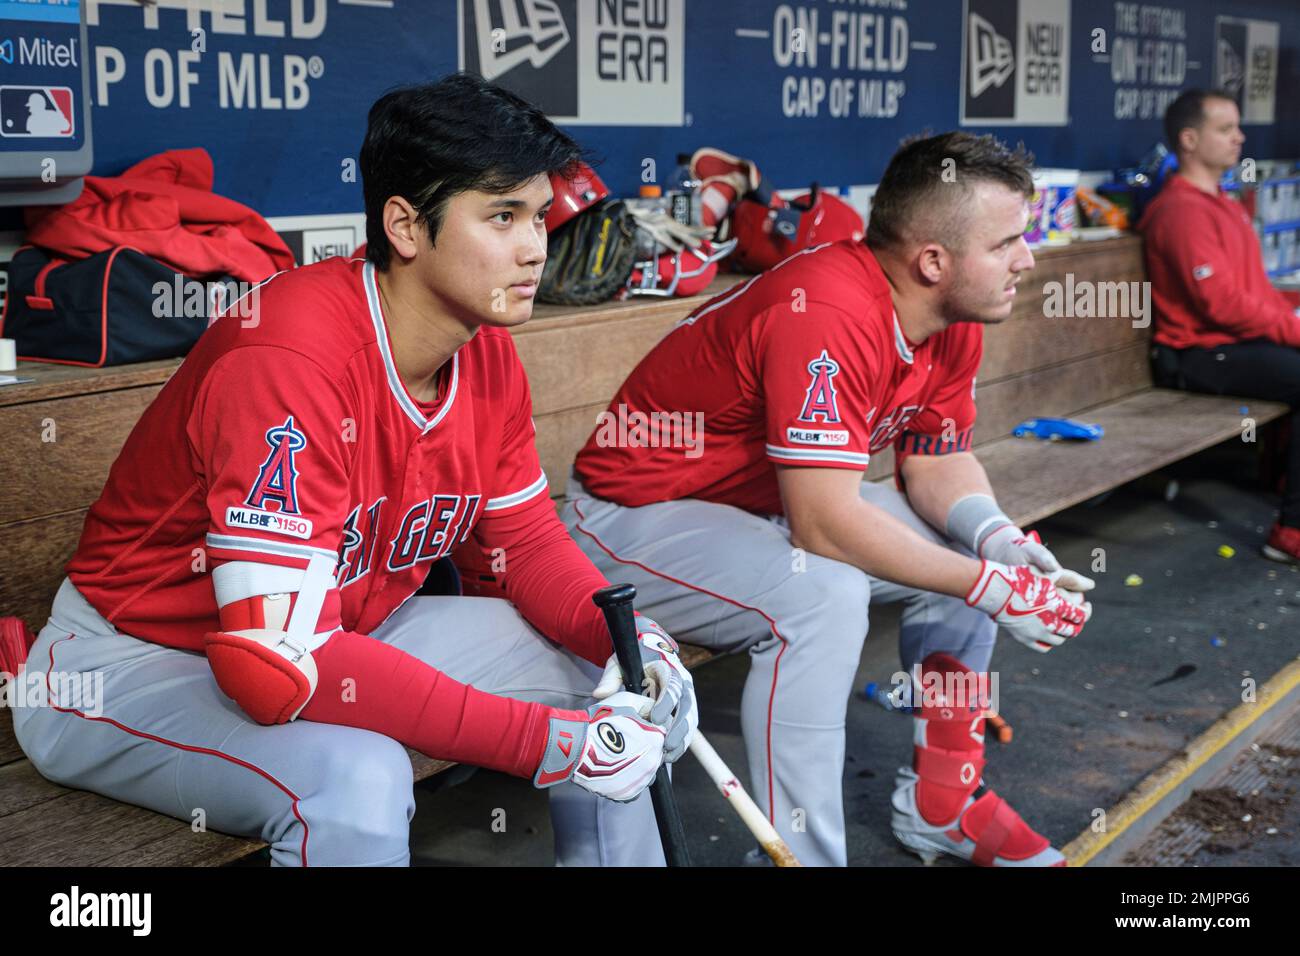 Seattle Mariners' Shohei Ohtani, left, and Mike Trout sit on the bench in  the dugout during a baseball game against the Seattle Mariners, Friday, May  31, 2019, in Seattle. The Mariners won